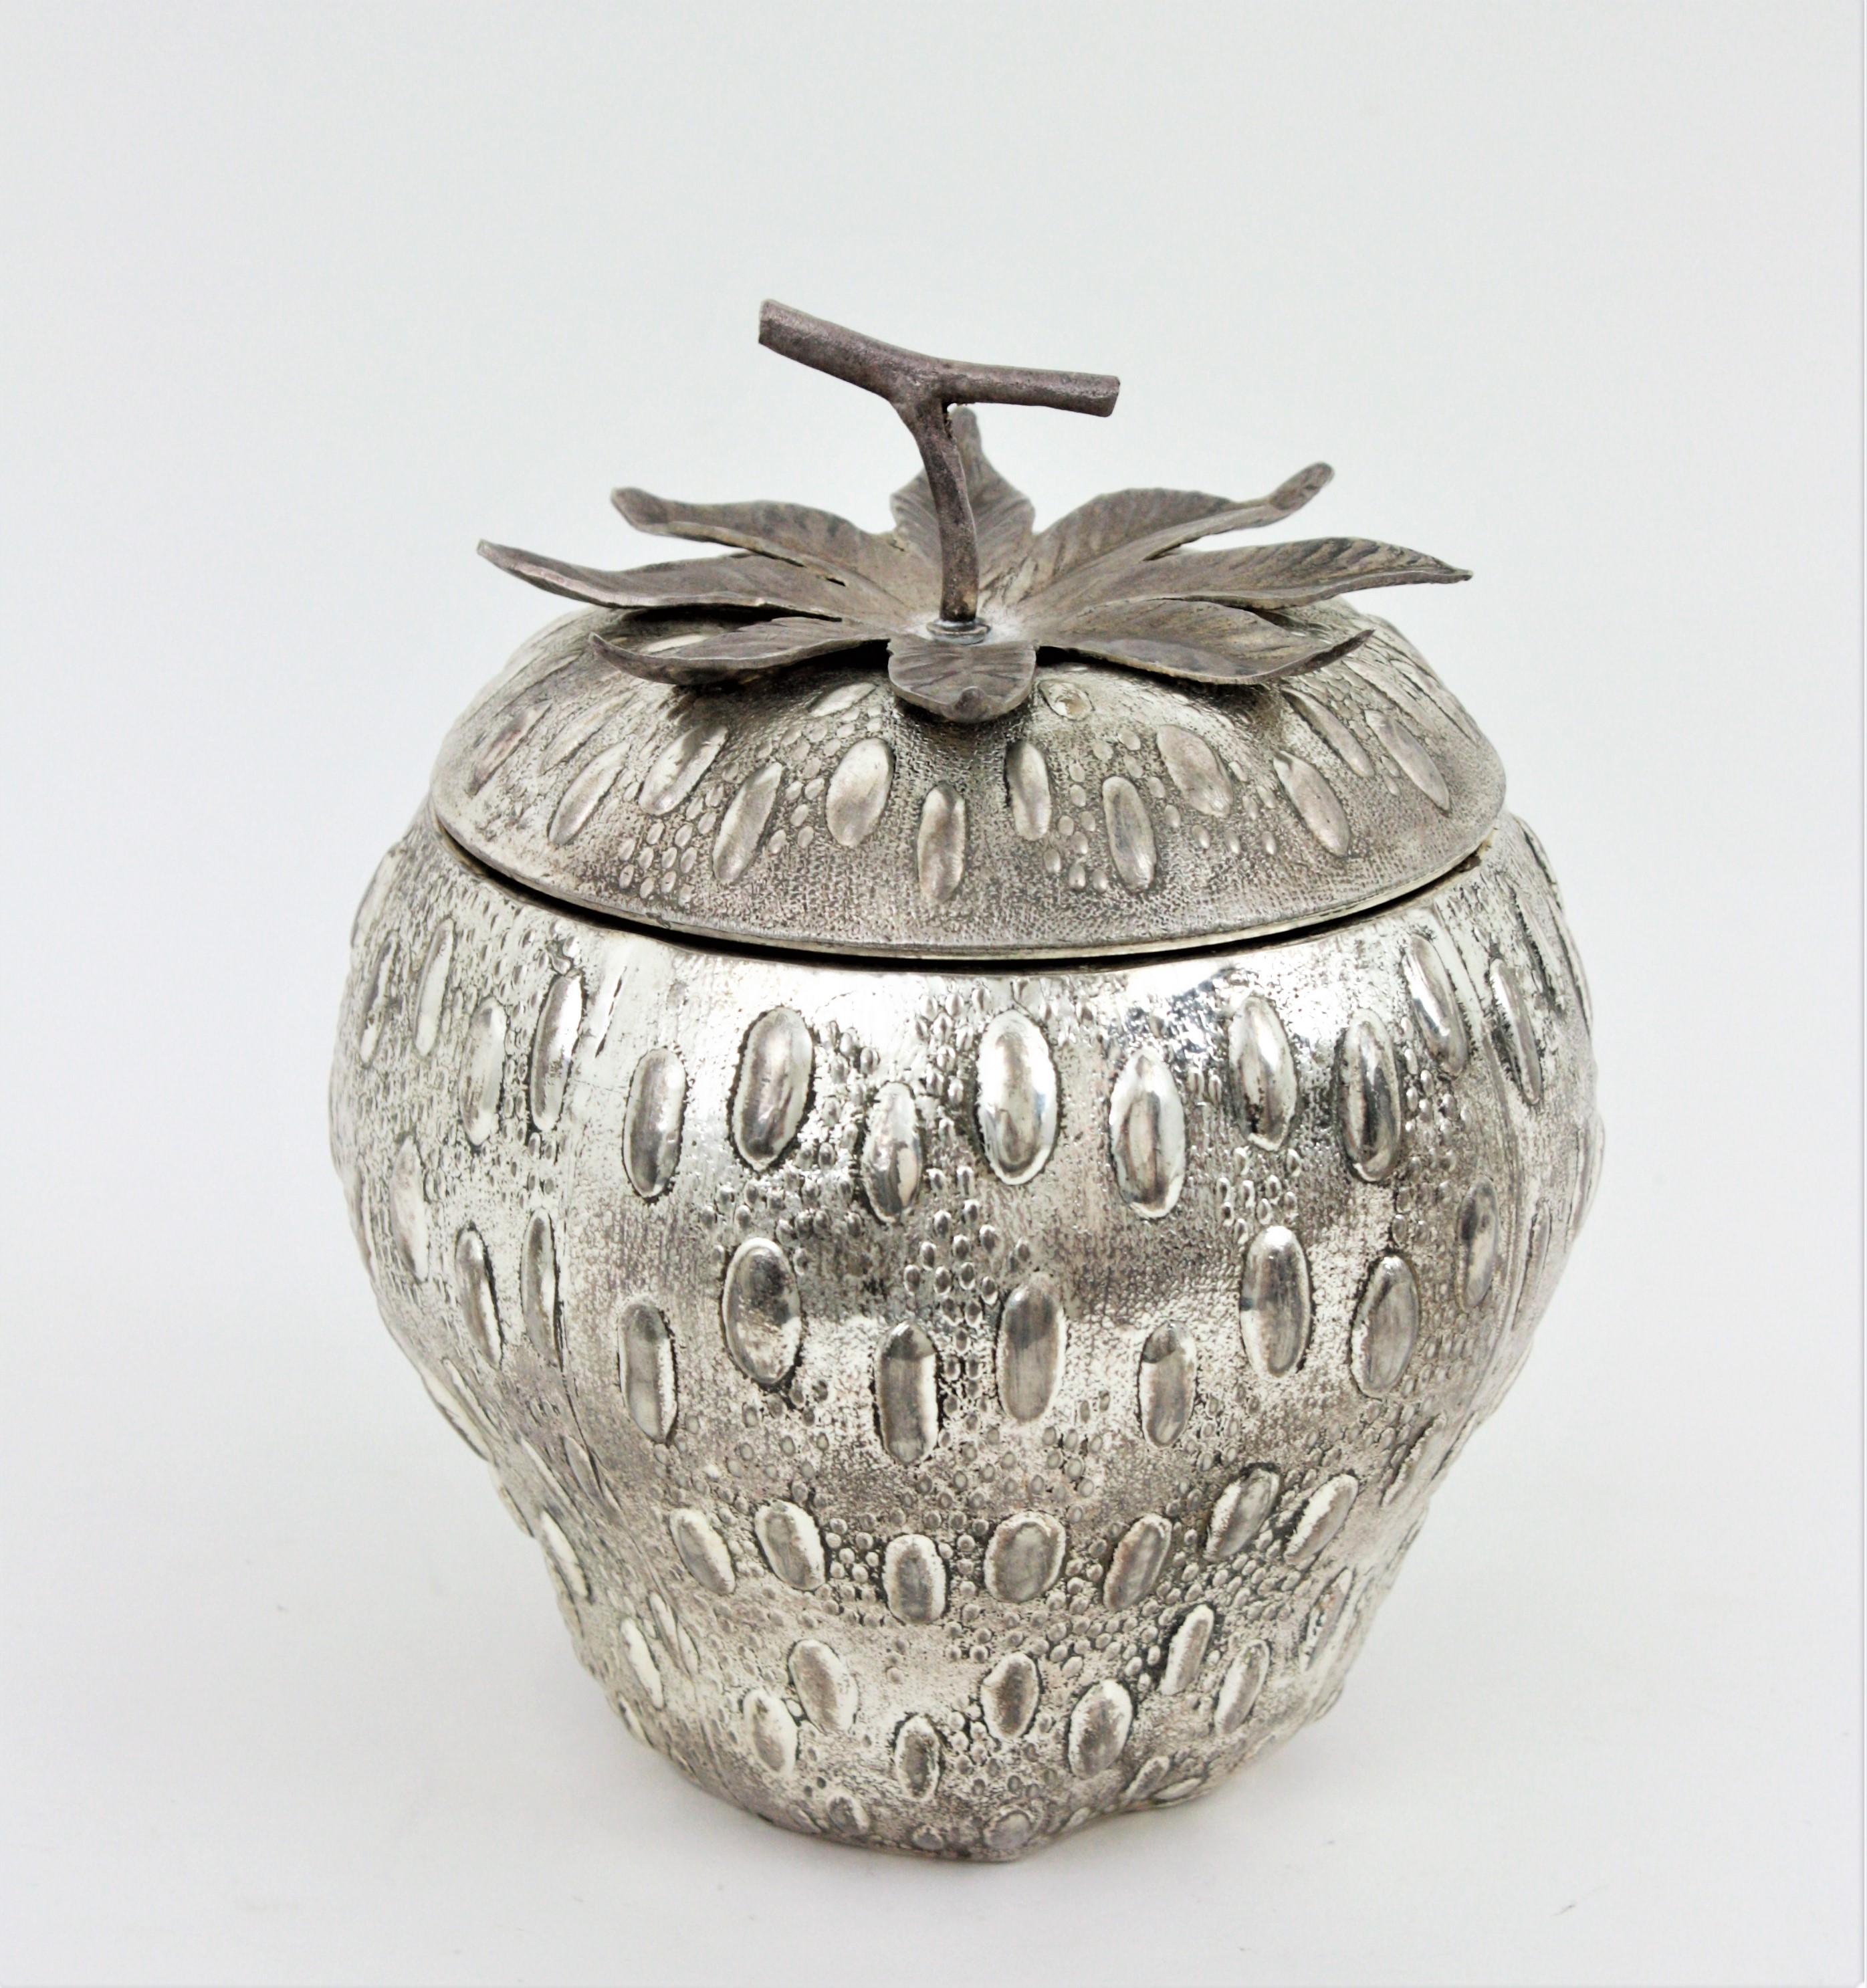 An exquisite Hollywood Regency silvered cast aluminium strawberry shaped ice bucket or wine chiller. Designed by Mauro Manetti and manufactured by Fonderia d'Arte Foundry. Italy, circa 1965.
This strawberry sculpture was designed to be used as an